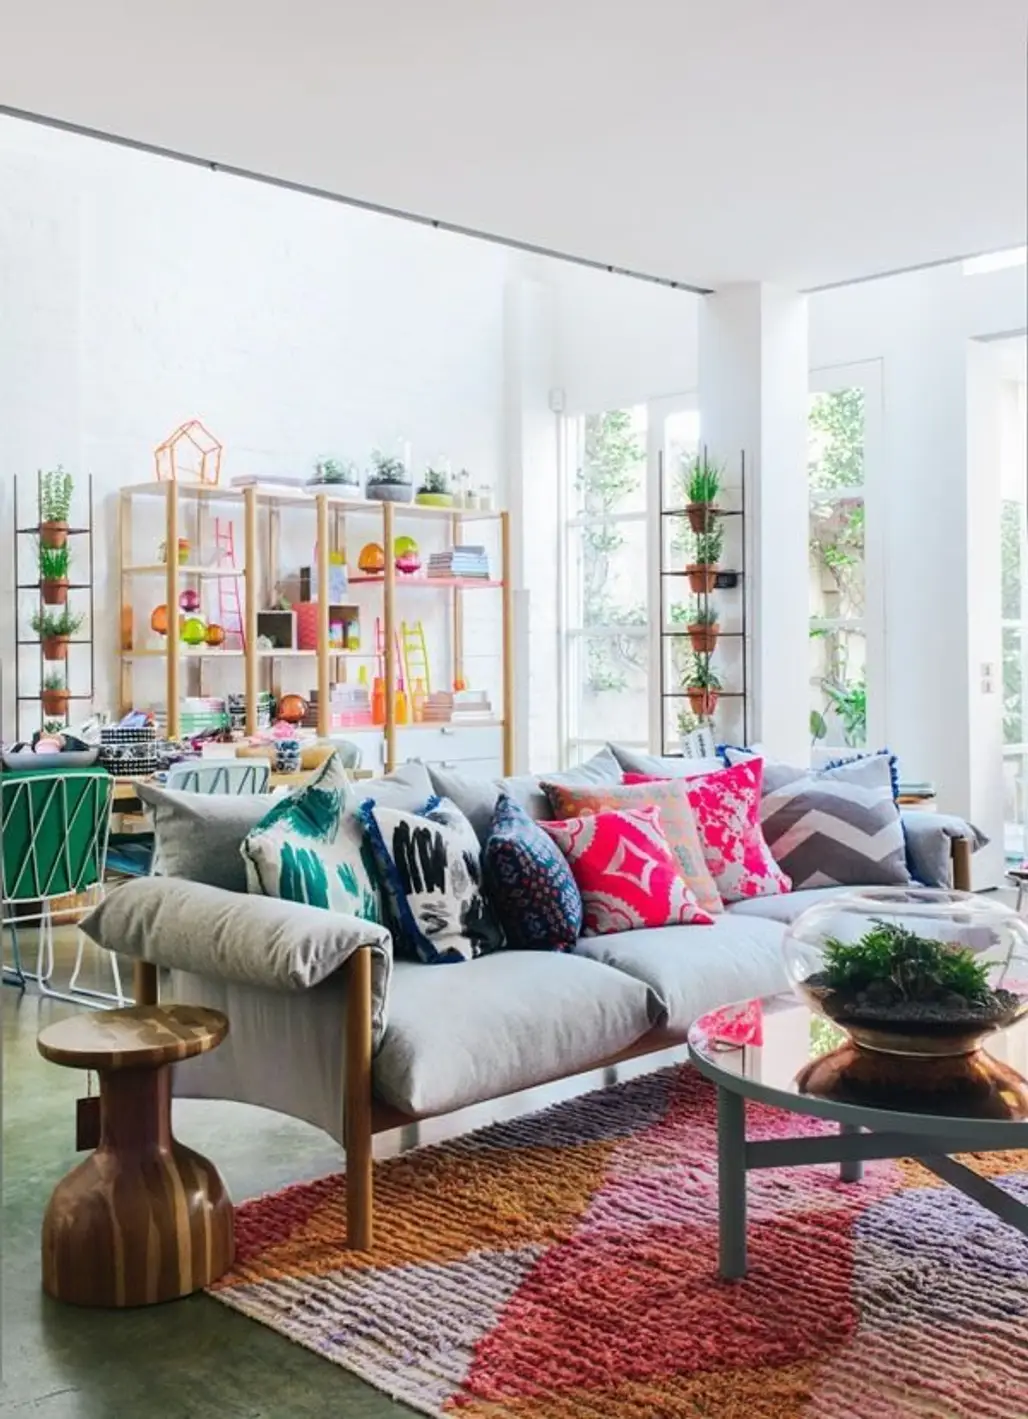 LOVING All of the Vibrant Colors in This Space!